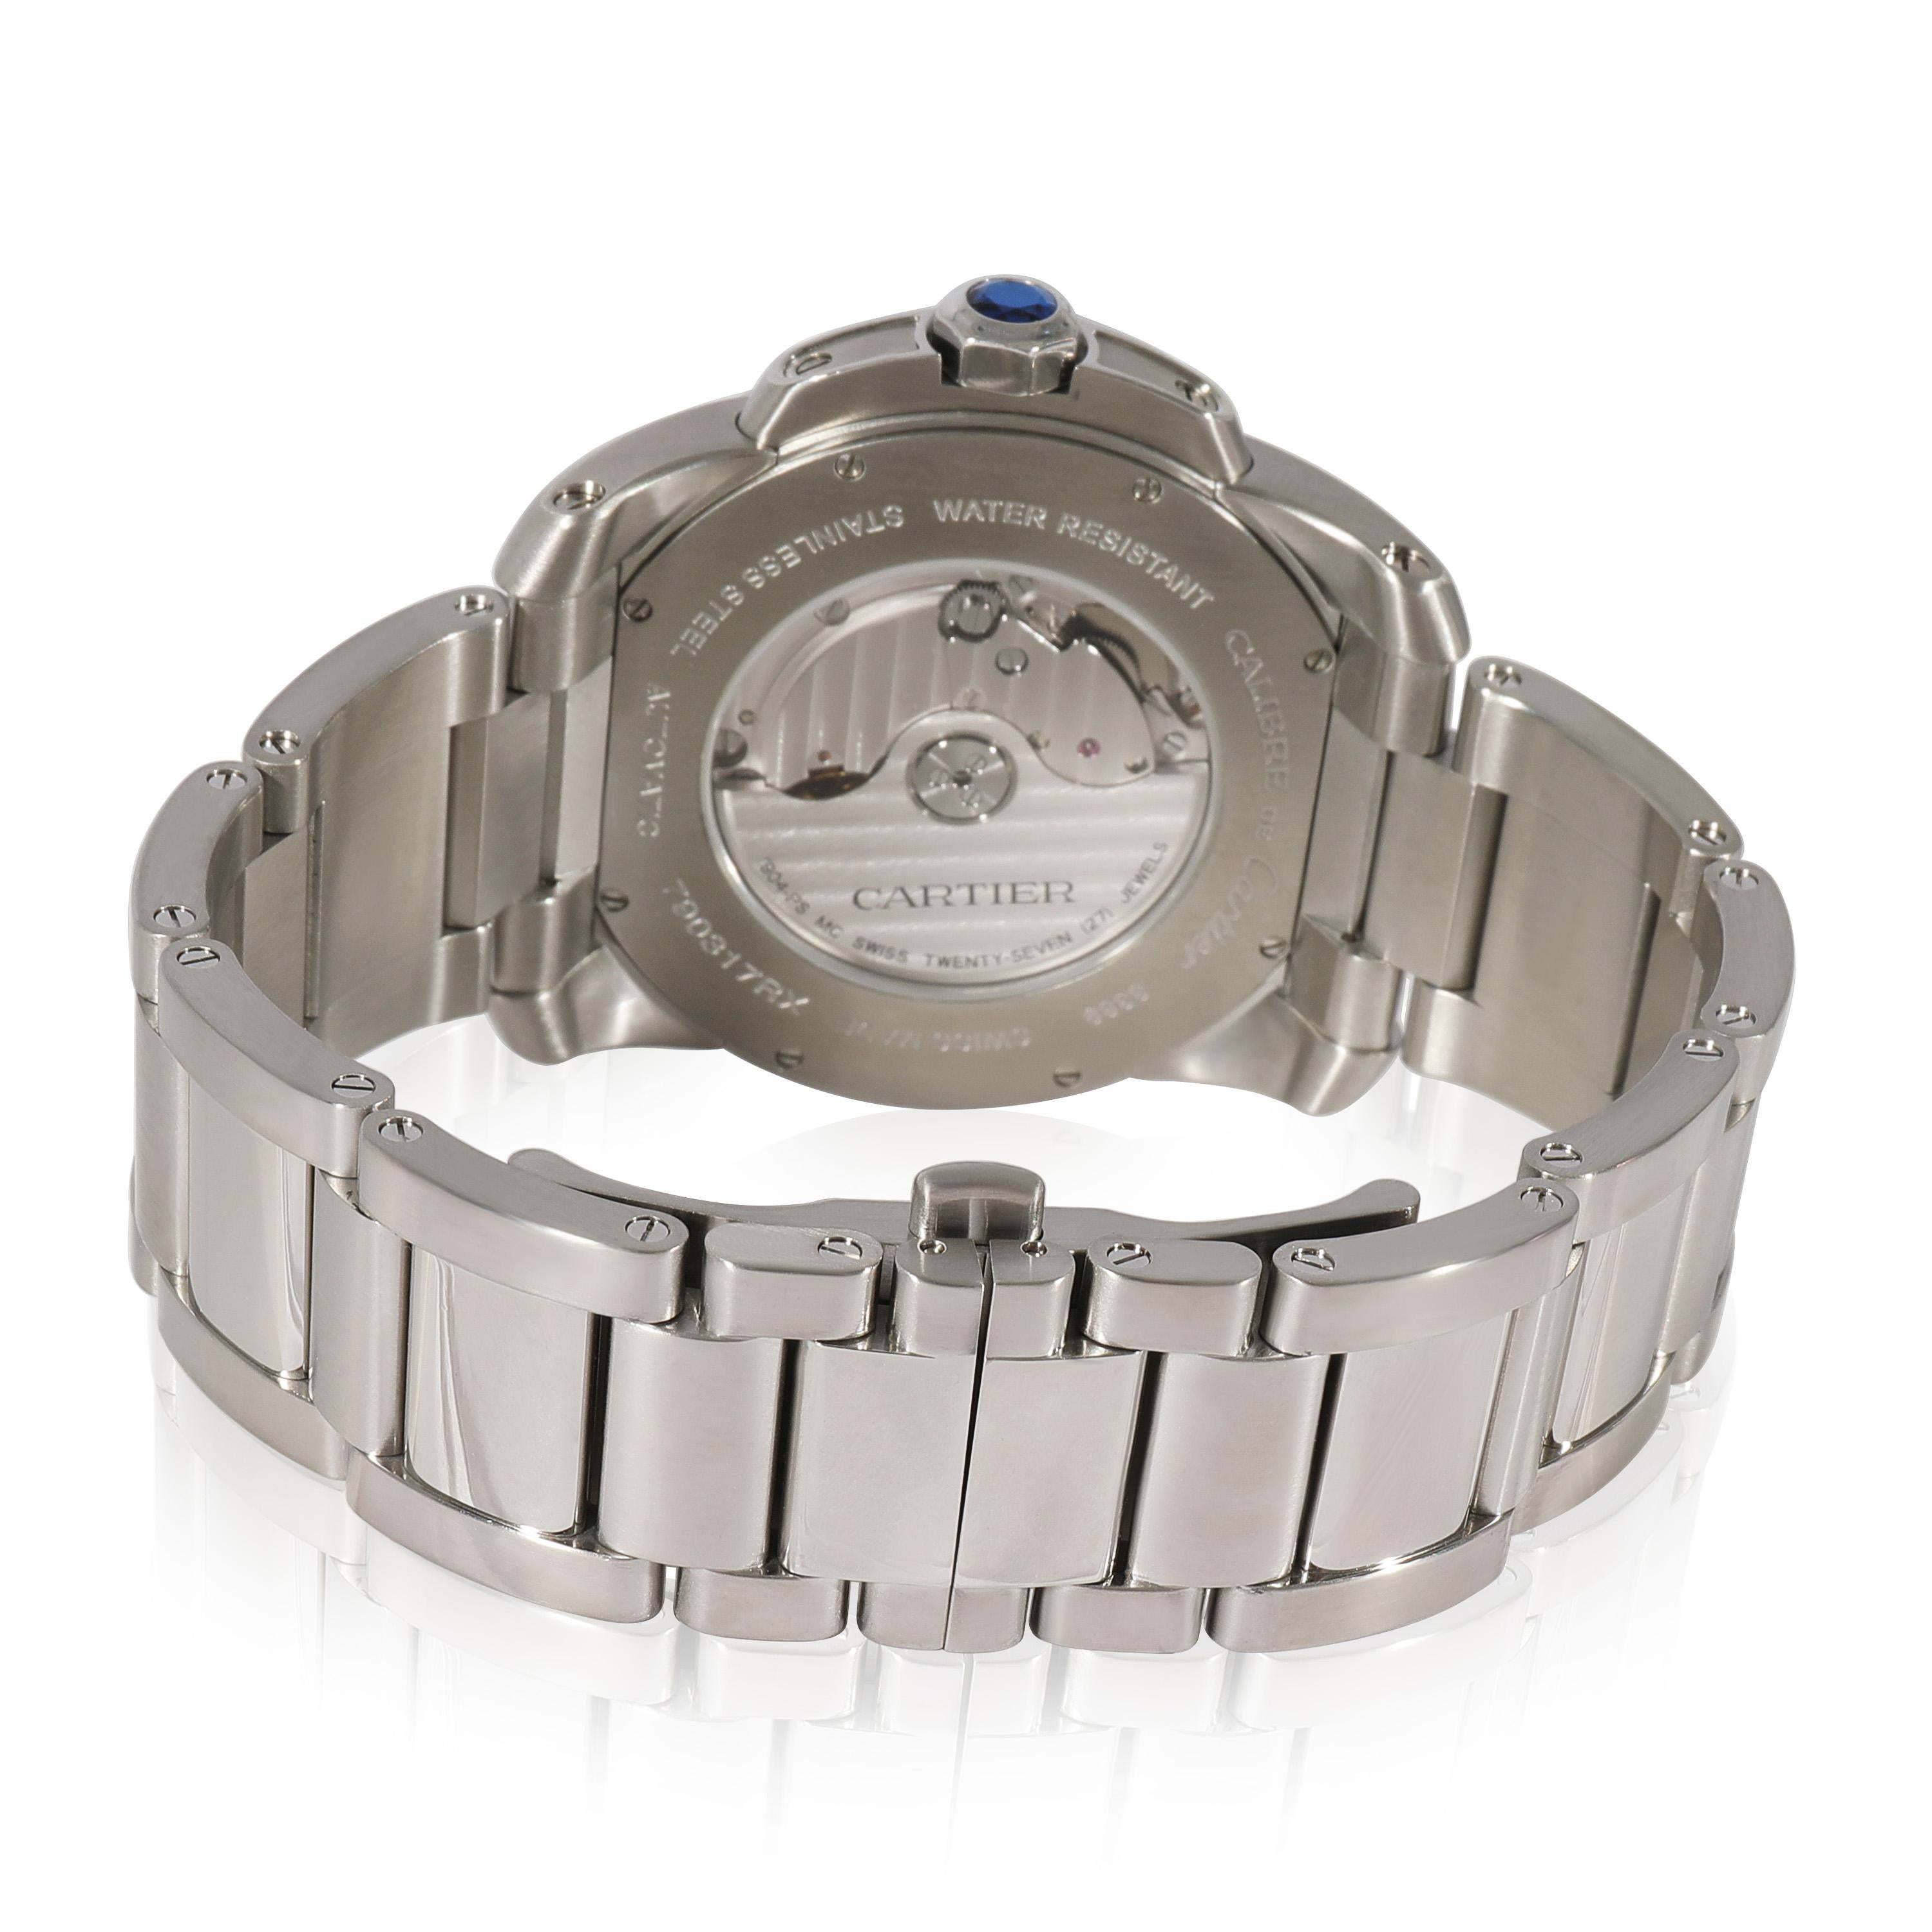 Cartier Calibre W7100016 Men's Watch in  Stainless Steel

SKU: 124878

PRIMARY DETAILS
Brand: Cartier
Model: Calibre
Country of Origin: Switzerland
Movement Type: Mechanical: Automatic/Kinetic
Year Manufactured: 2012
Year of Manufacture: